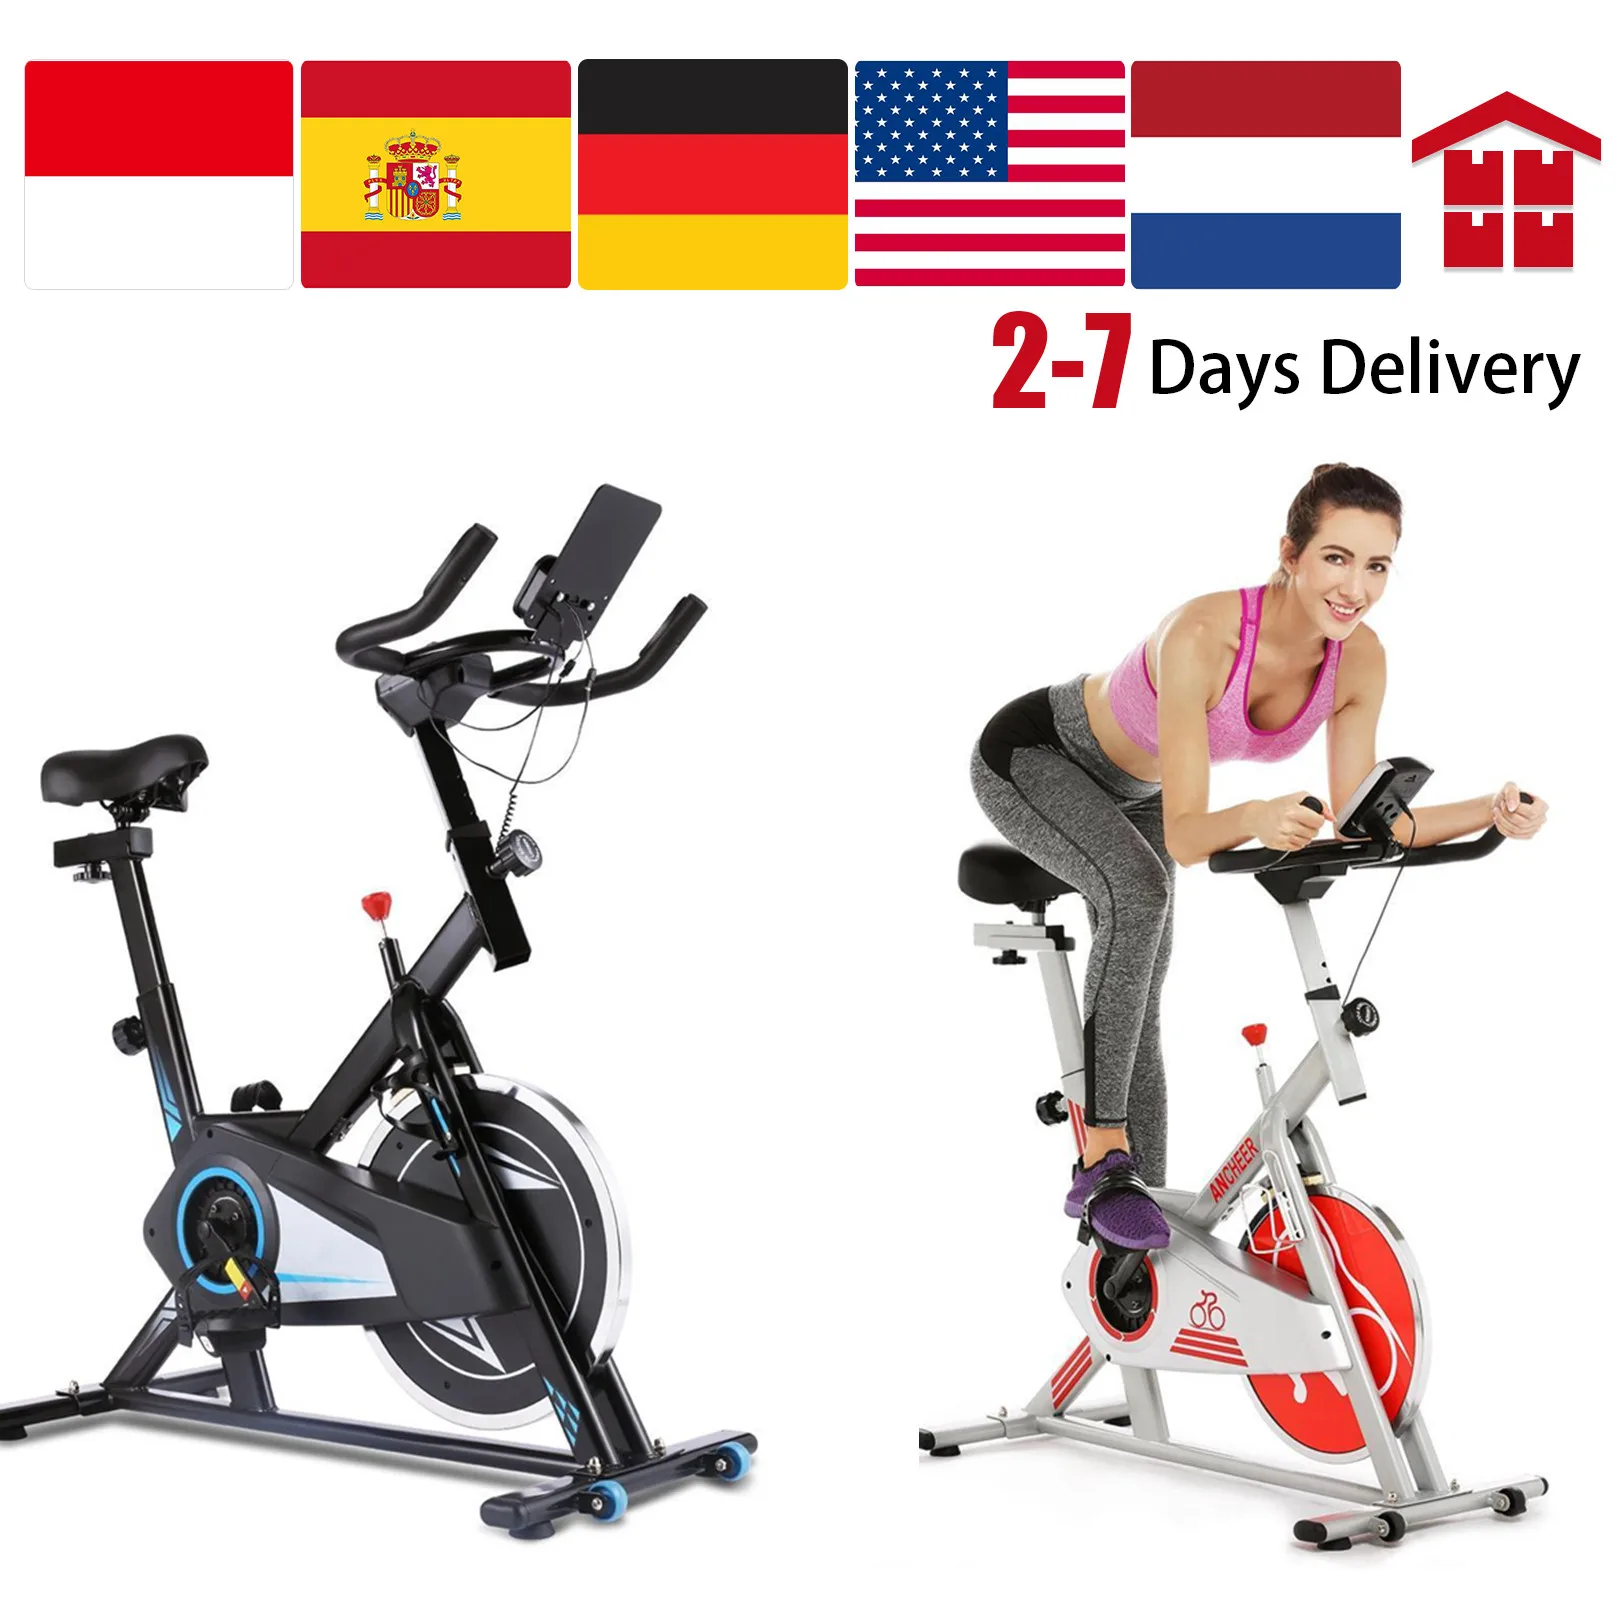 DHL Indoor Exercise Spinning Bike Professional Cycling Fitness Gym Home Bicycle 